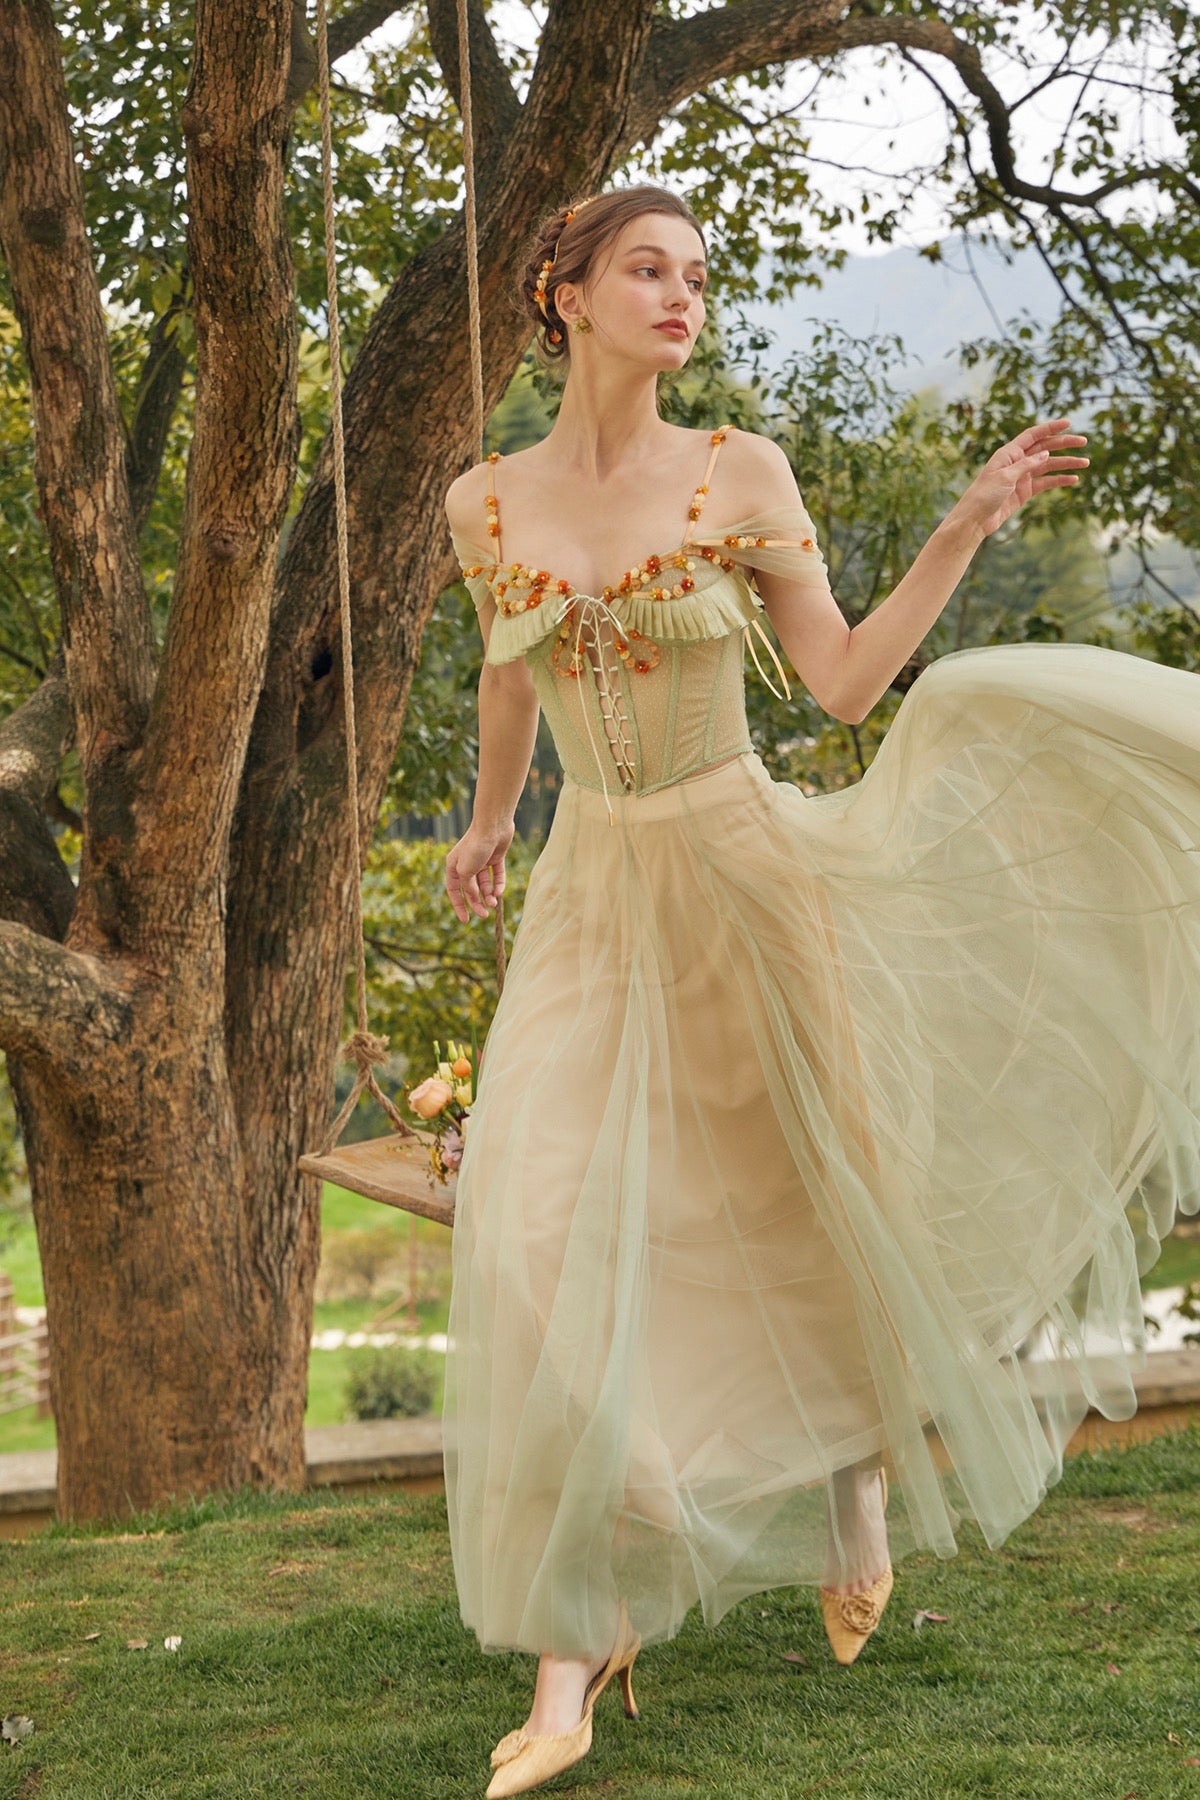 Lovely Fantasy Gown | Fantasy gowns, Fantasy dress, Fairy dress